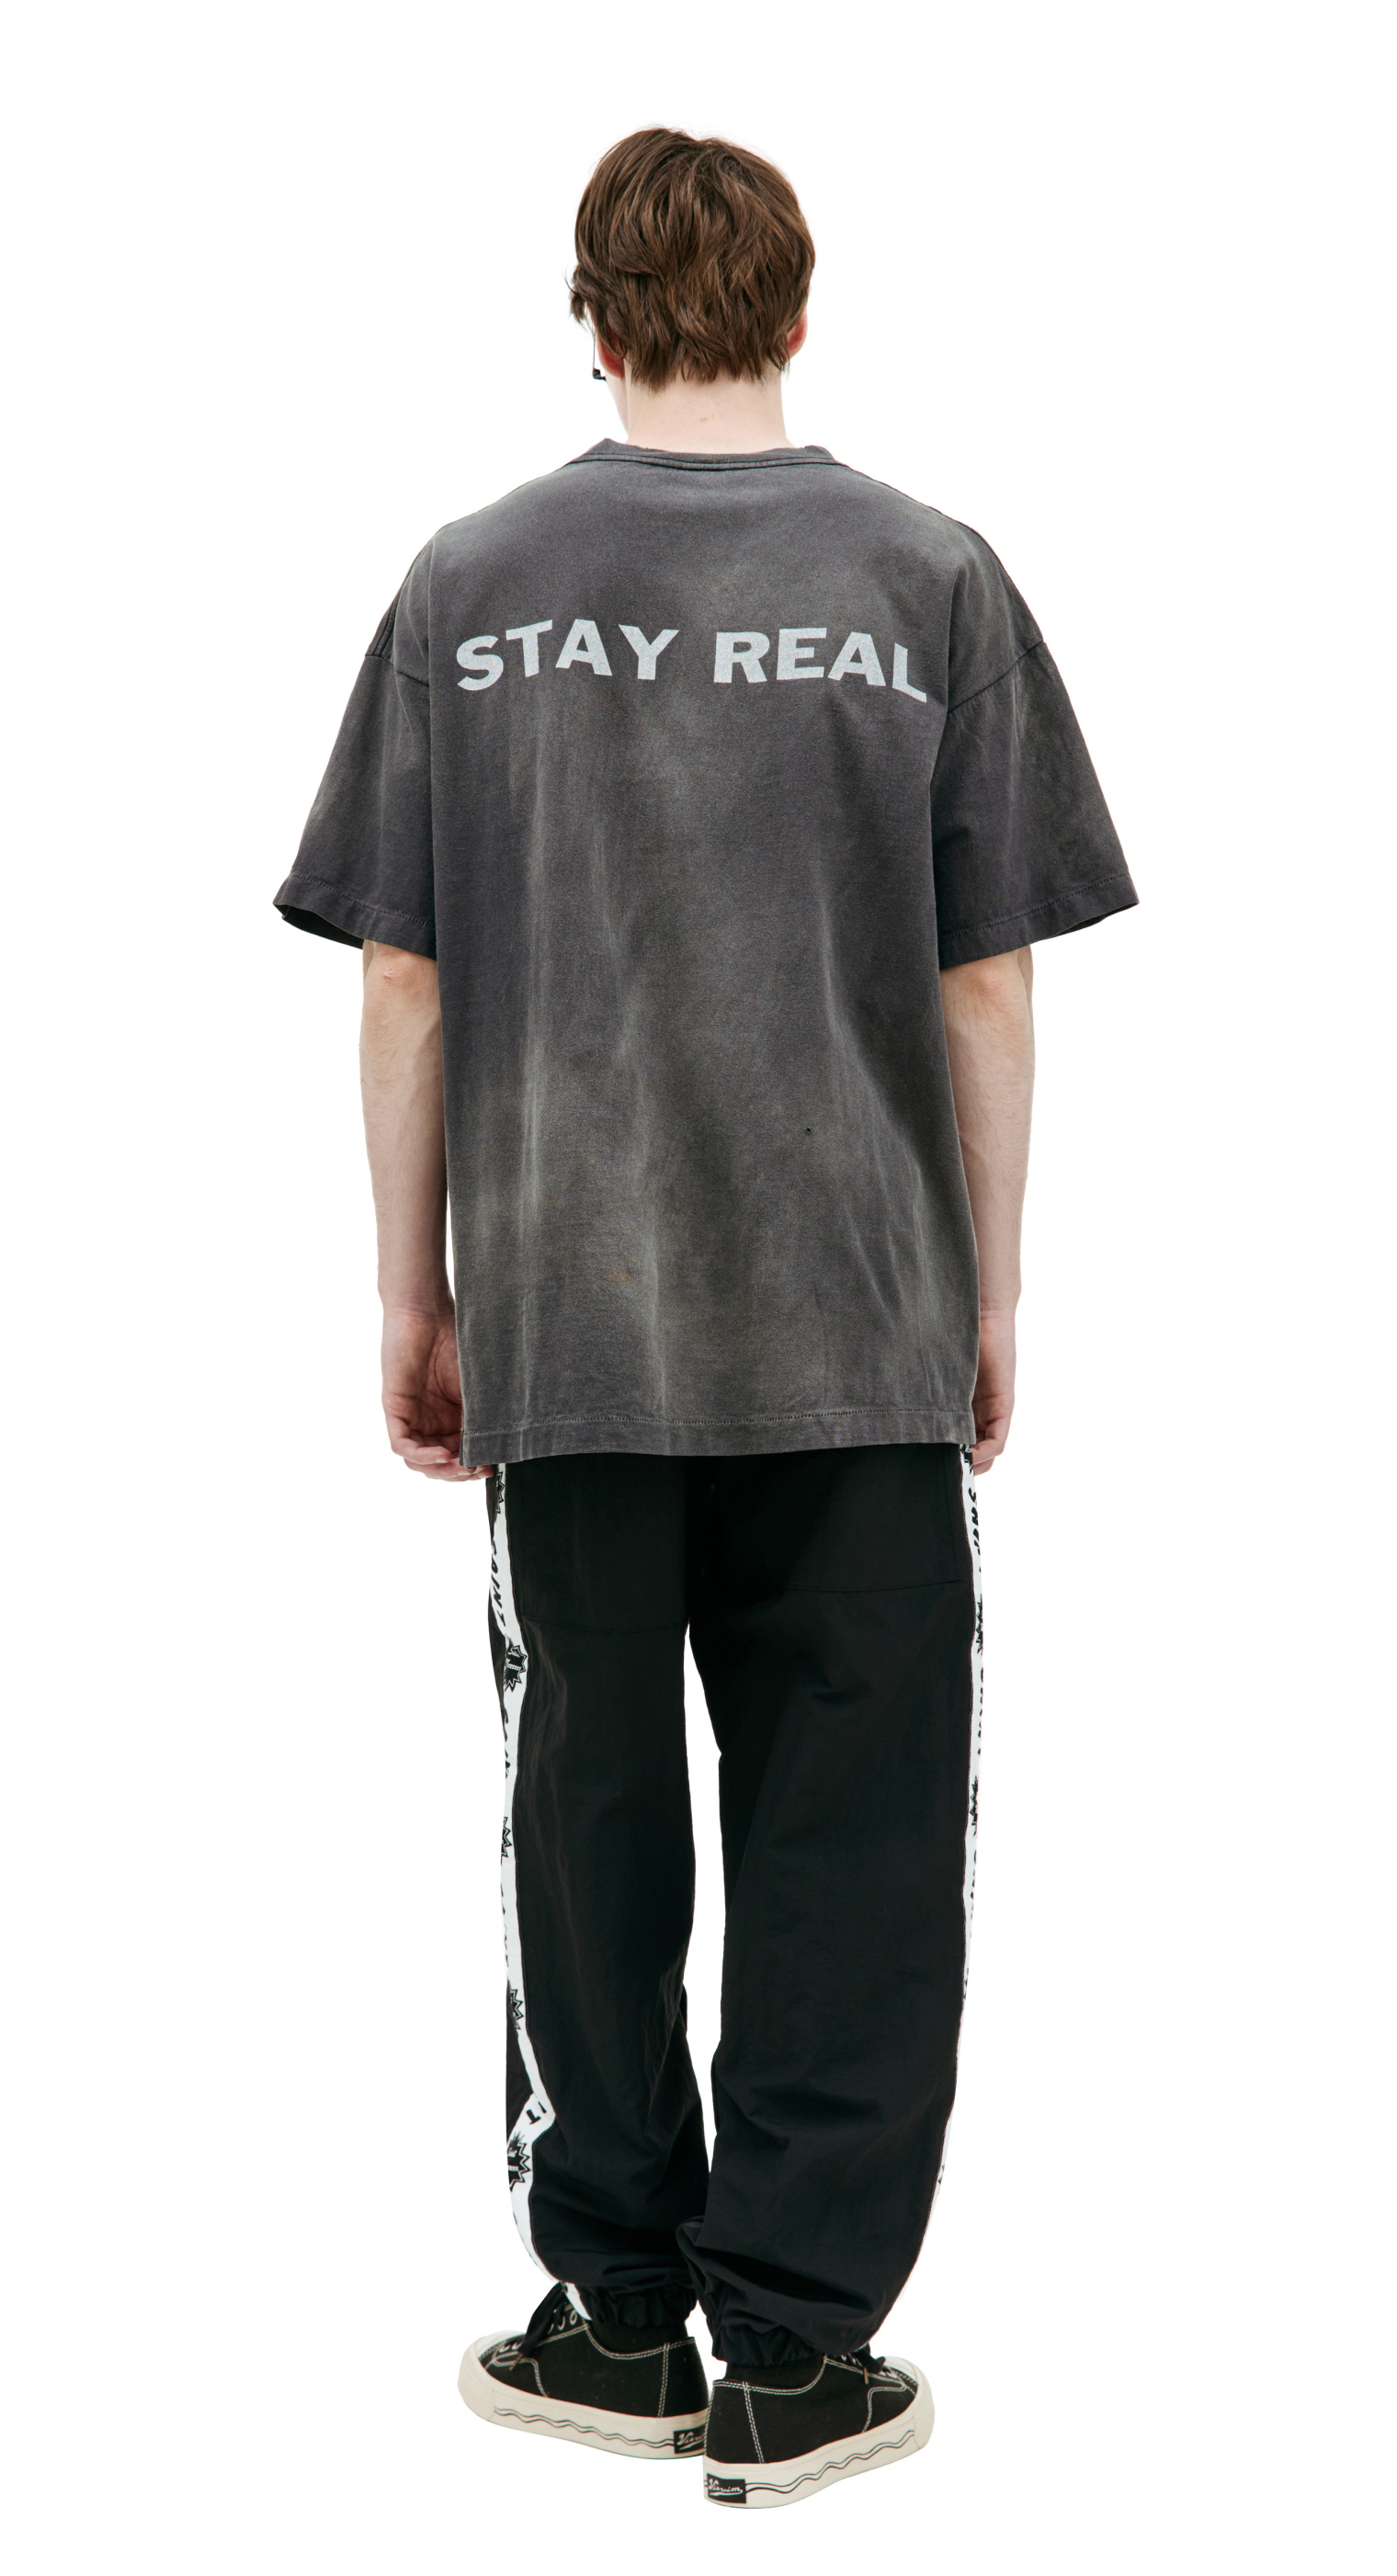 Saint Mxxxxxx STAY REAL printed t-shirt